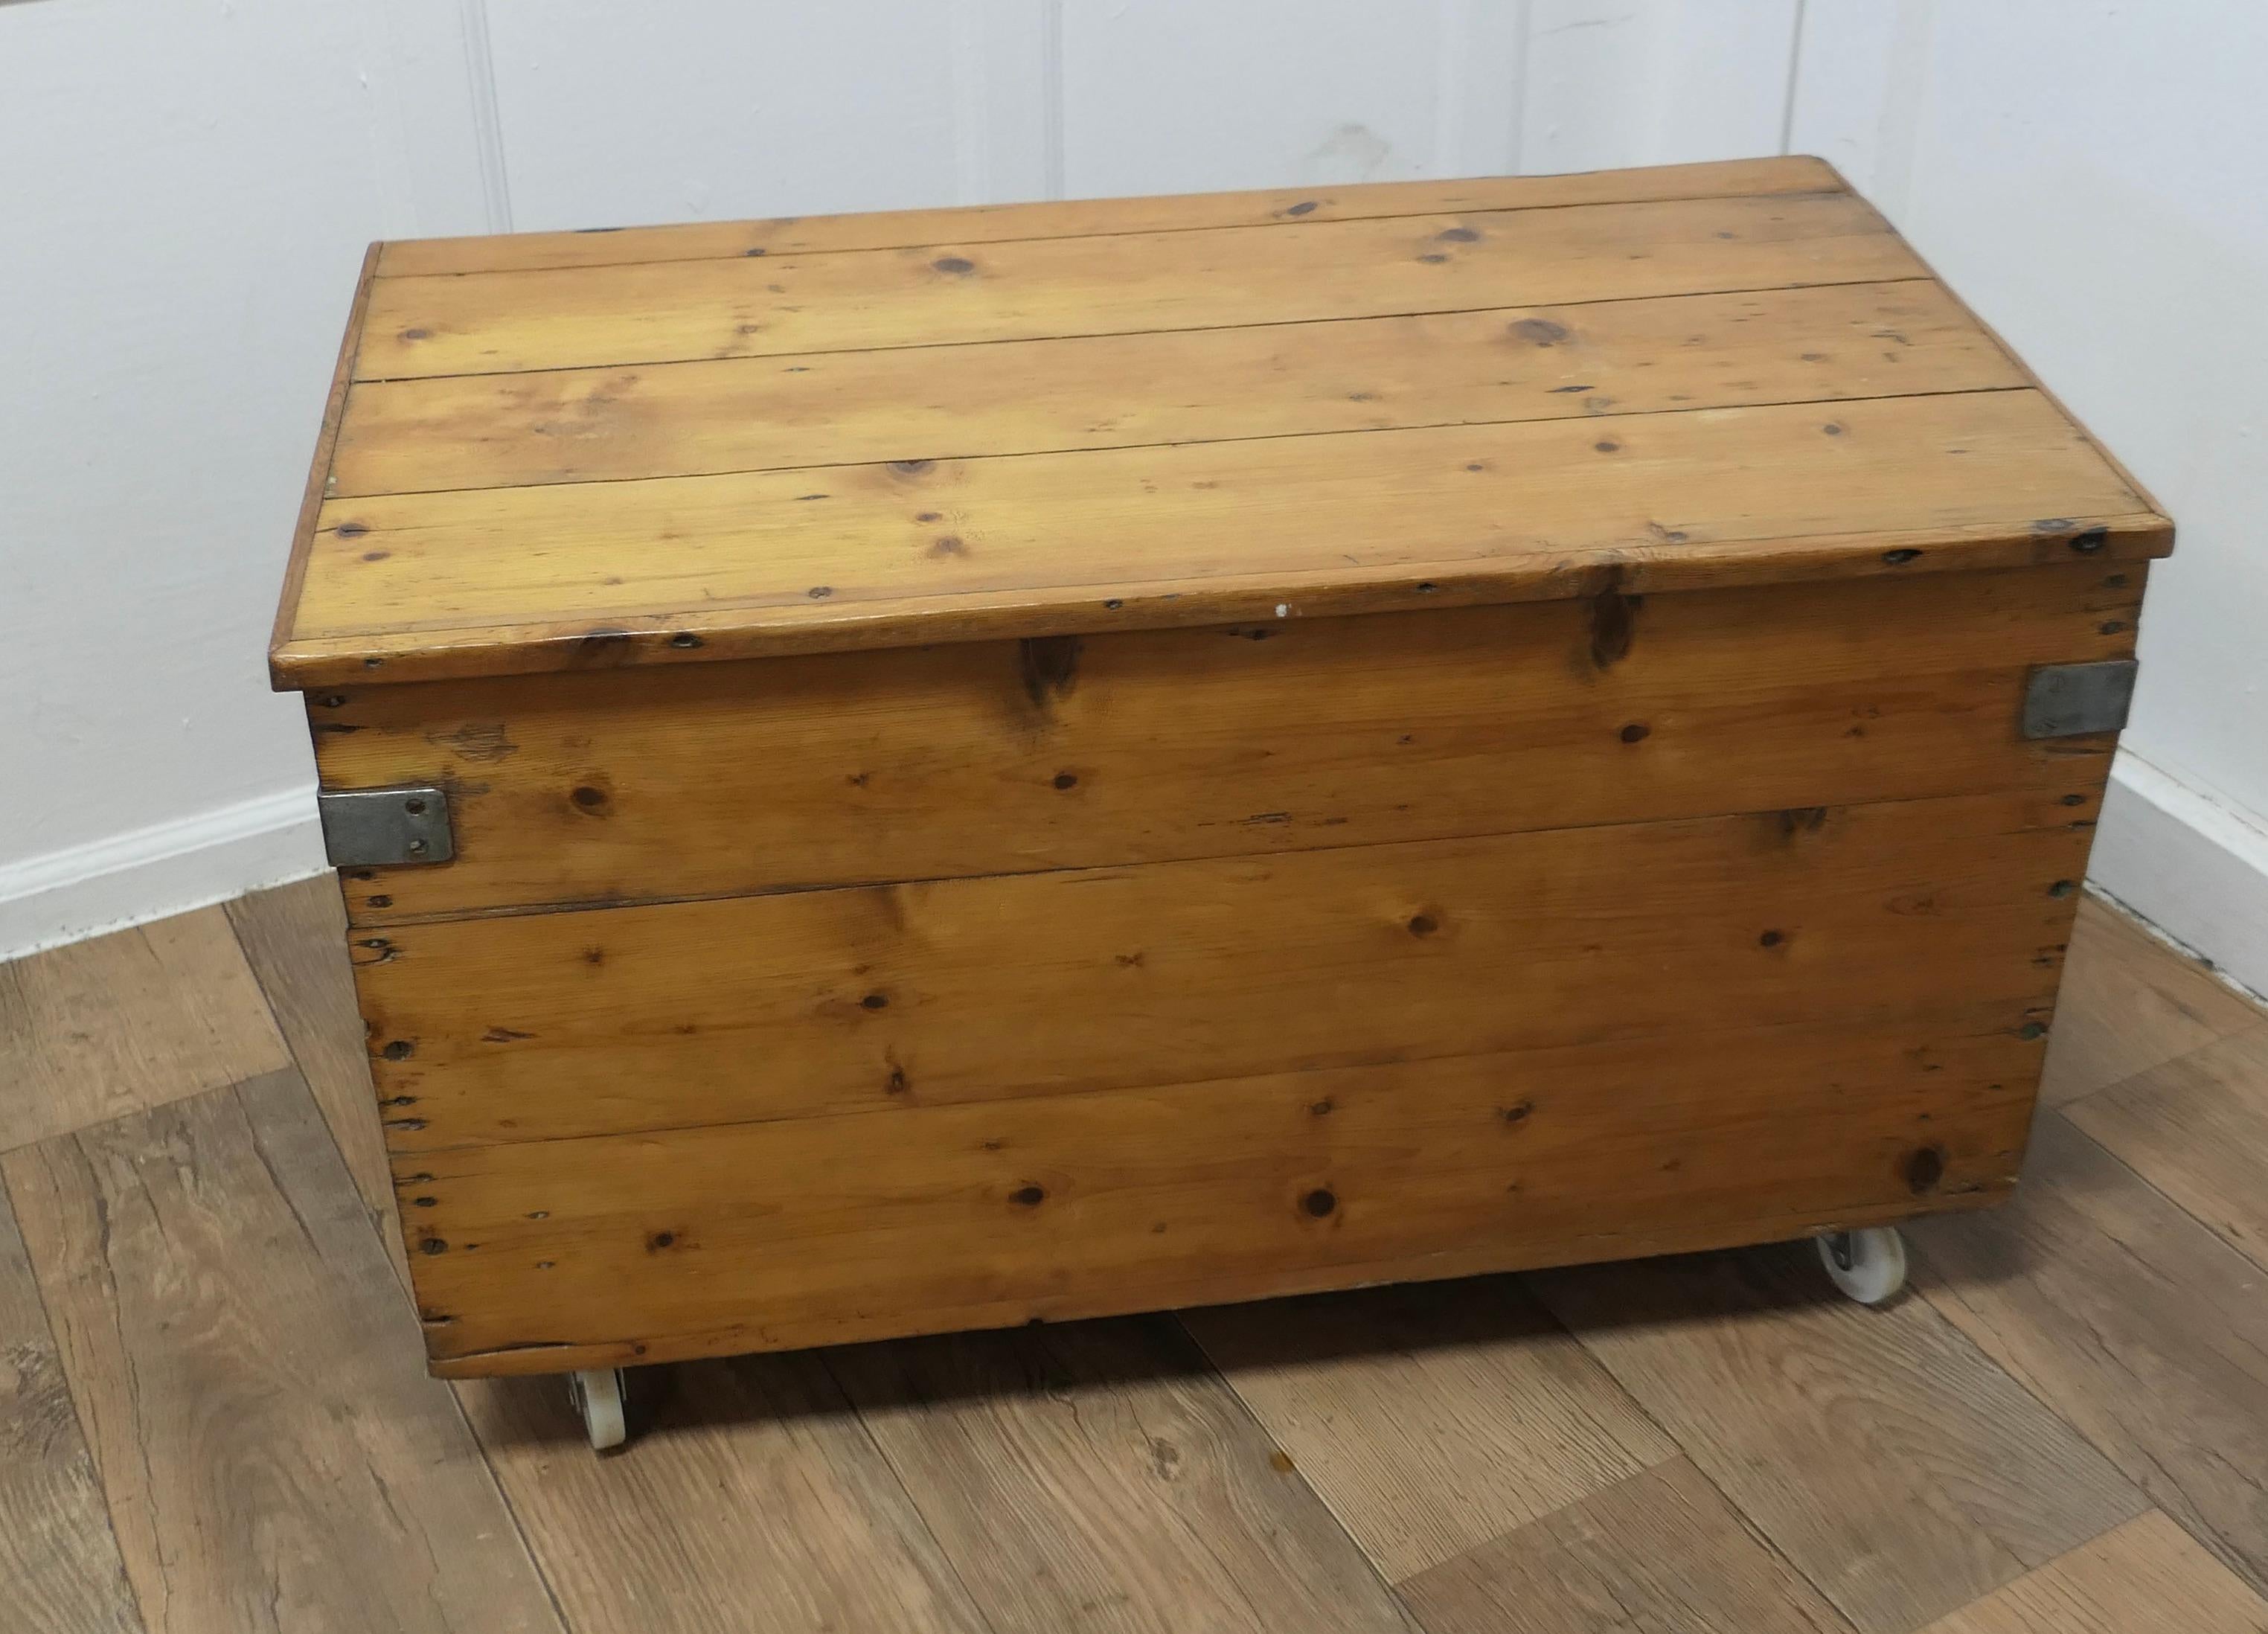 Strong Victorian Pine Blanket Box set on Wheels

This is a good heavy quality pine box it has been set on wheels making it easy to manoeuvre and it is a good height to be used as a coffee table
A good looking piece with a multitude of uses, clean